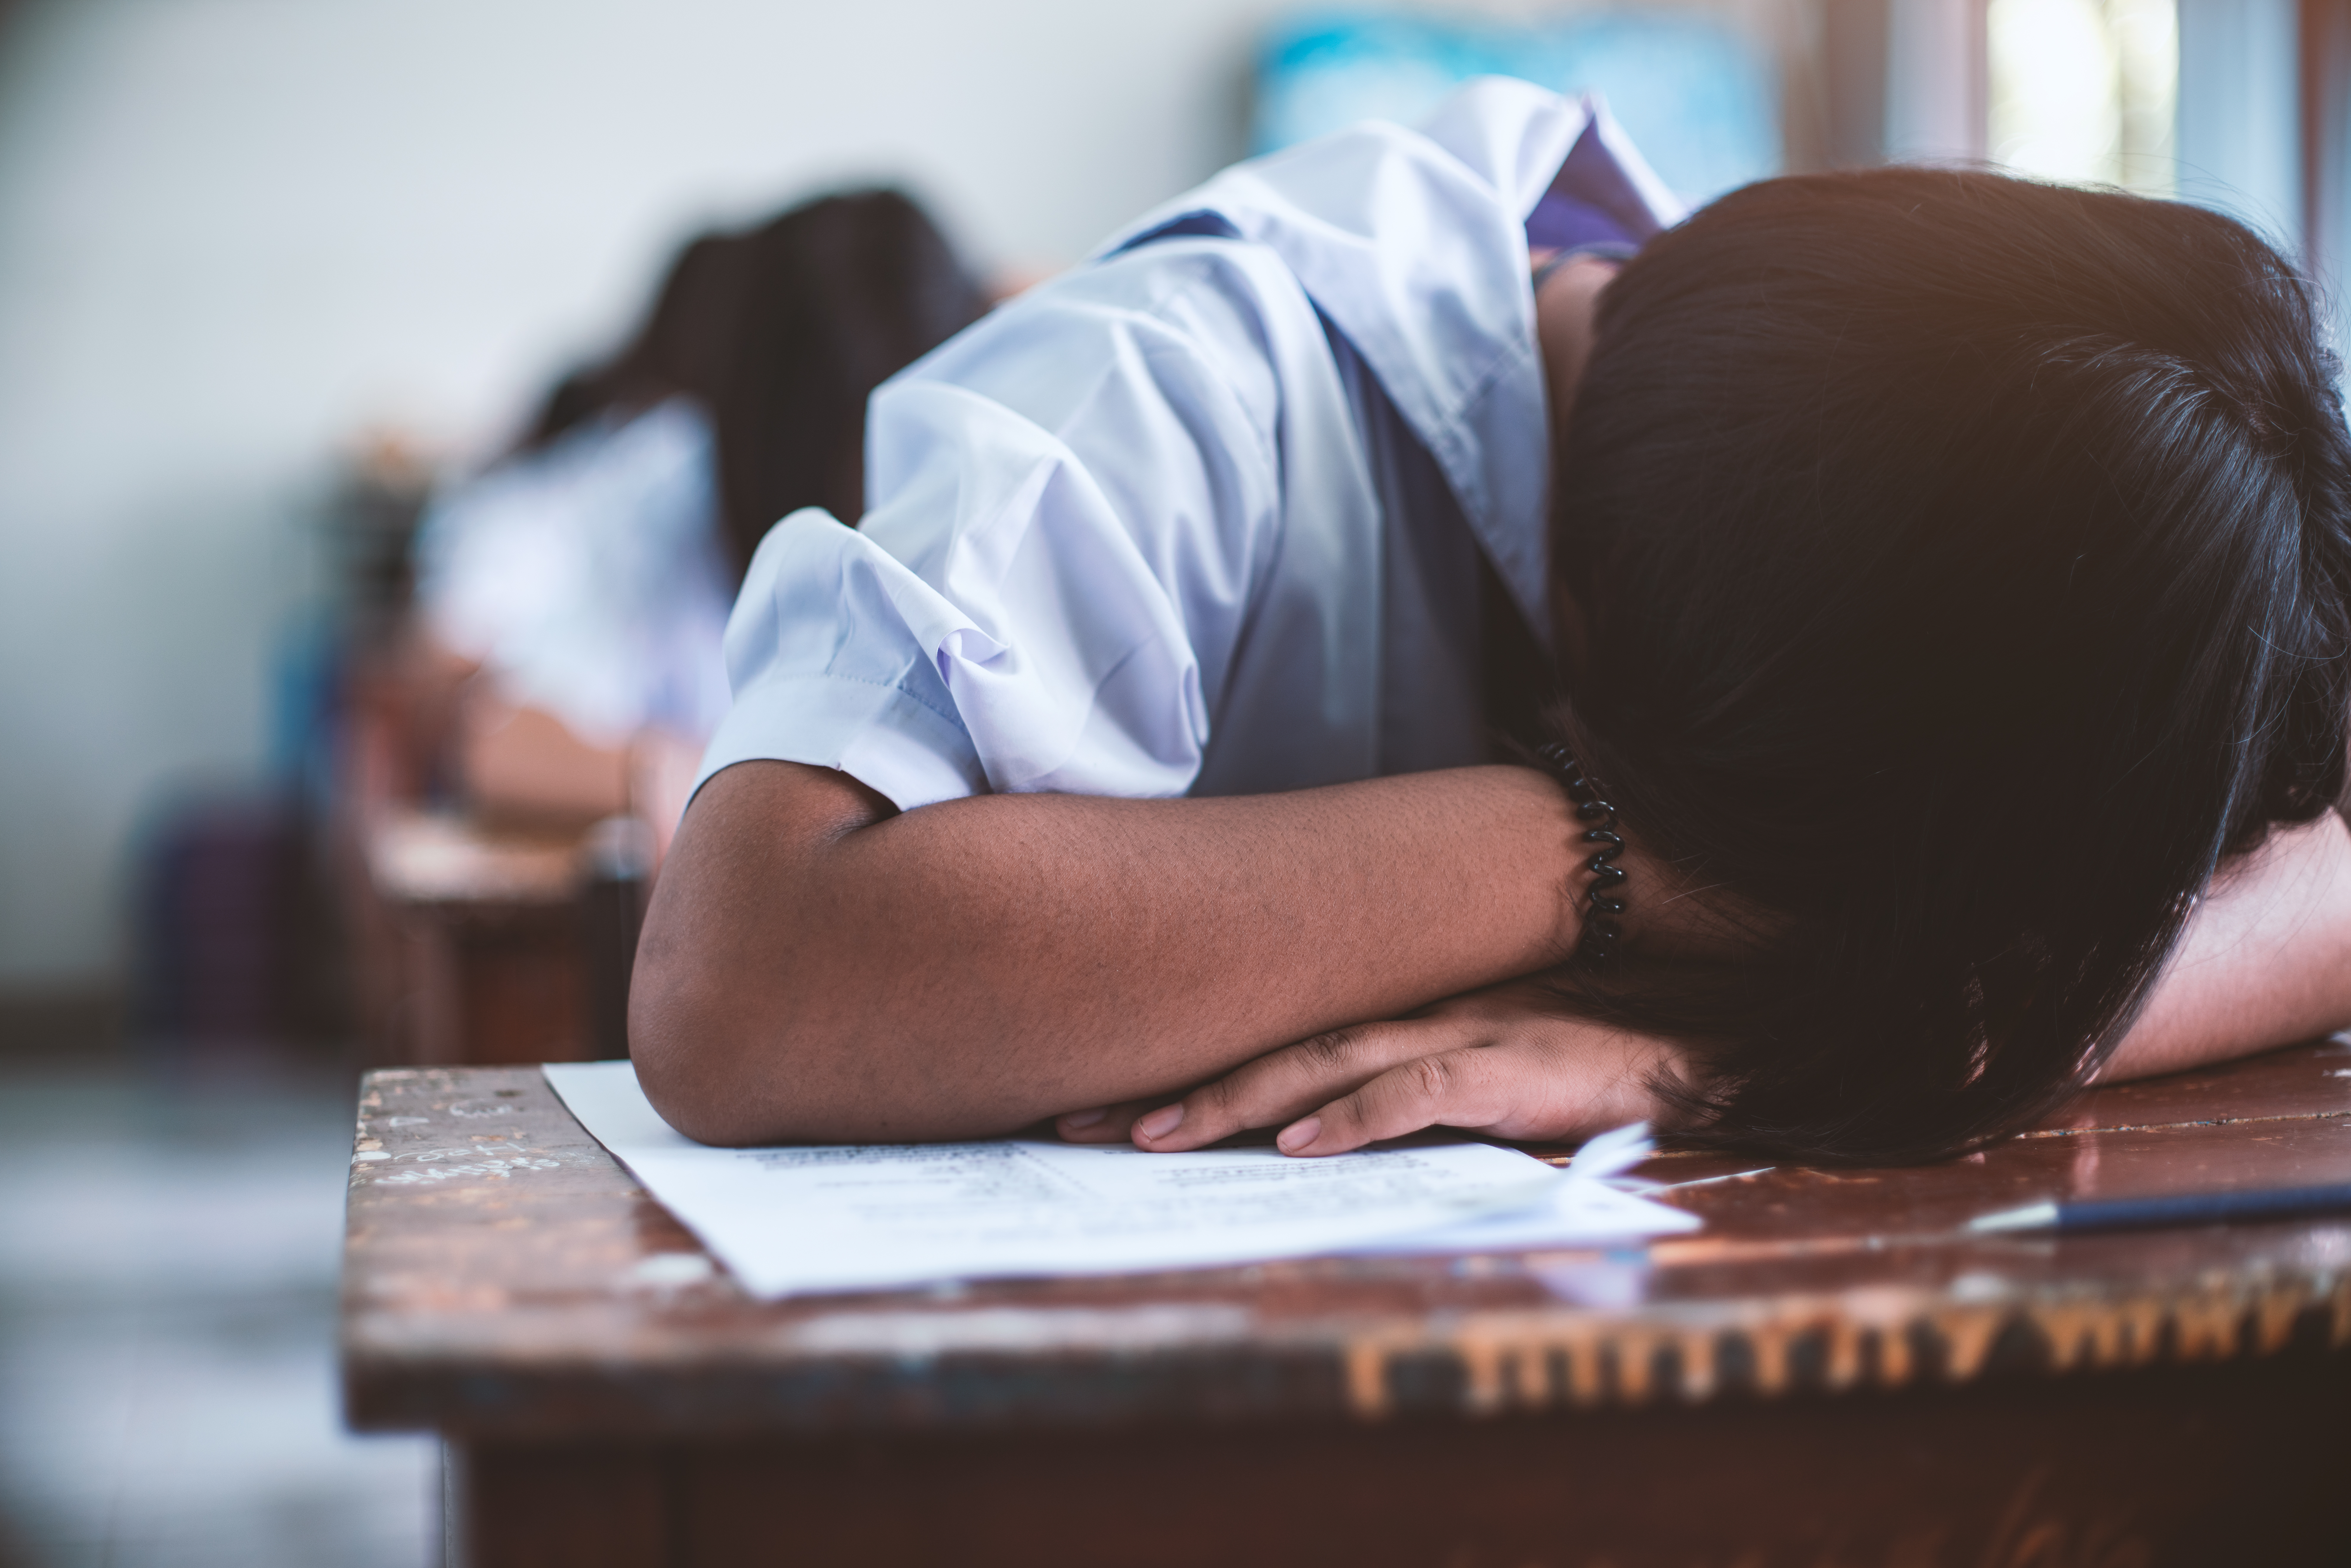 Close up of student with head down on a wooden desk, hair covering his or her face. Other students are working out of focus in the background.